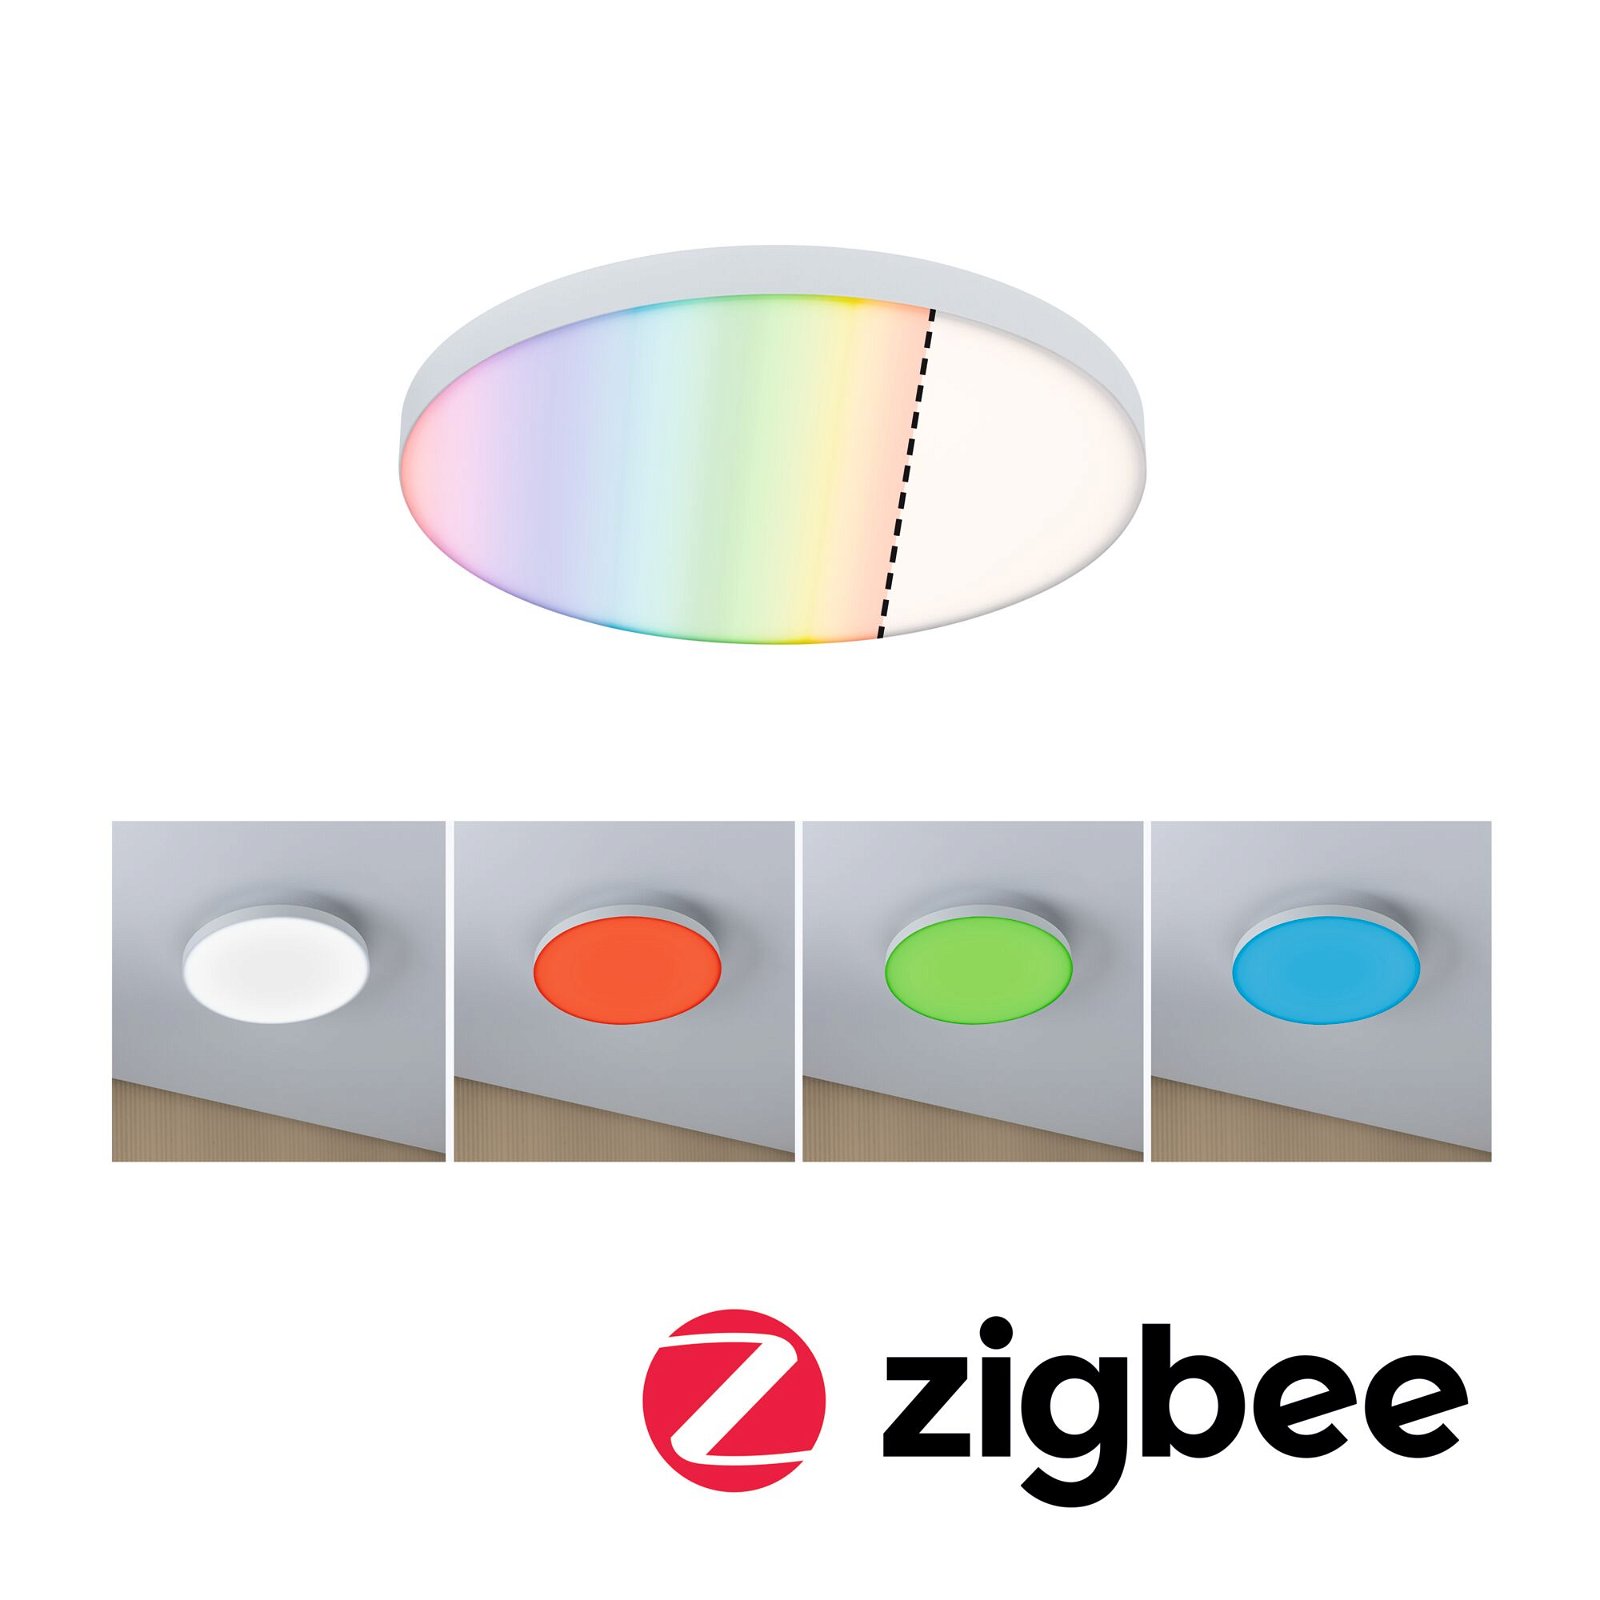 LED Panel Smart Home Zigbee Velora round 300mm 16,5W 1600lm RGBW White dimmable